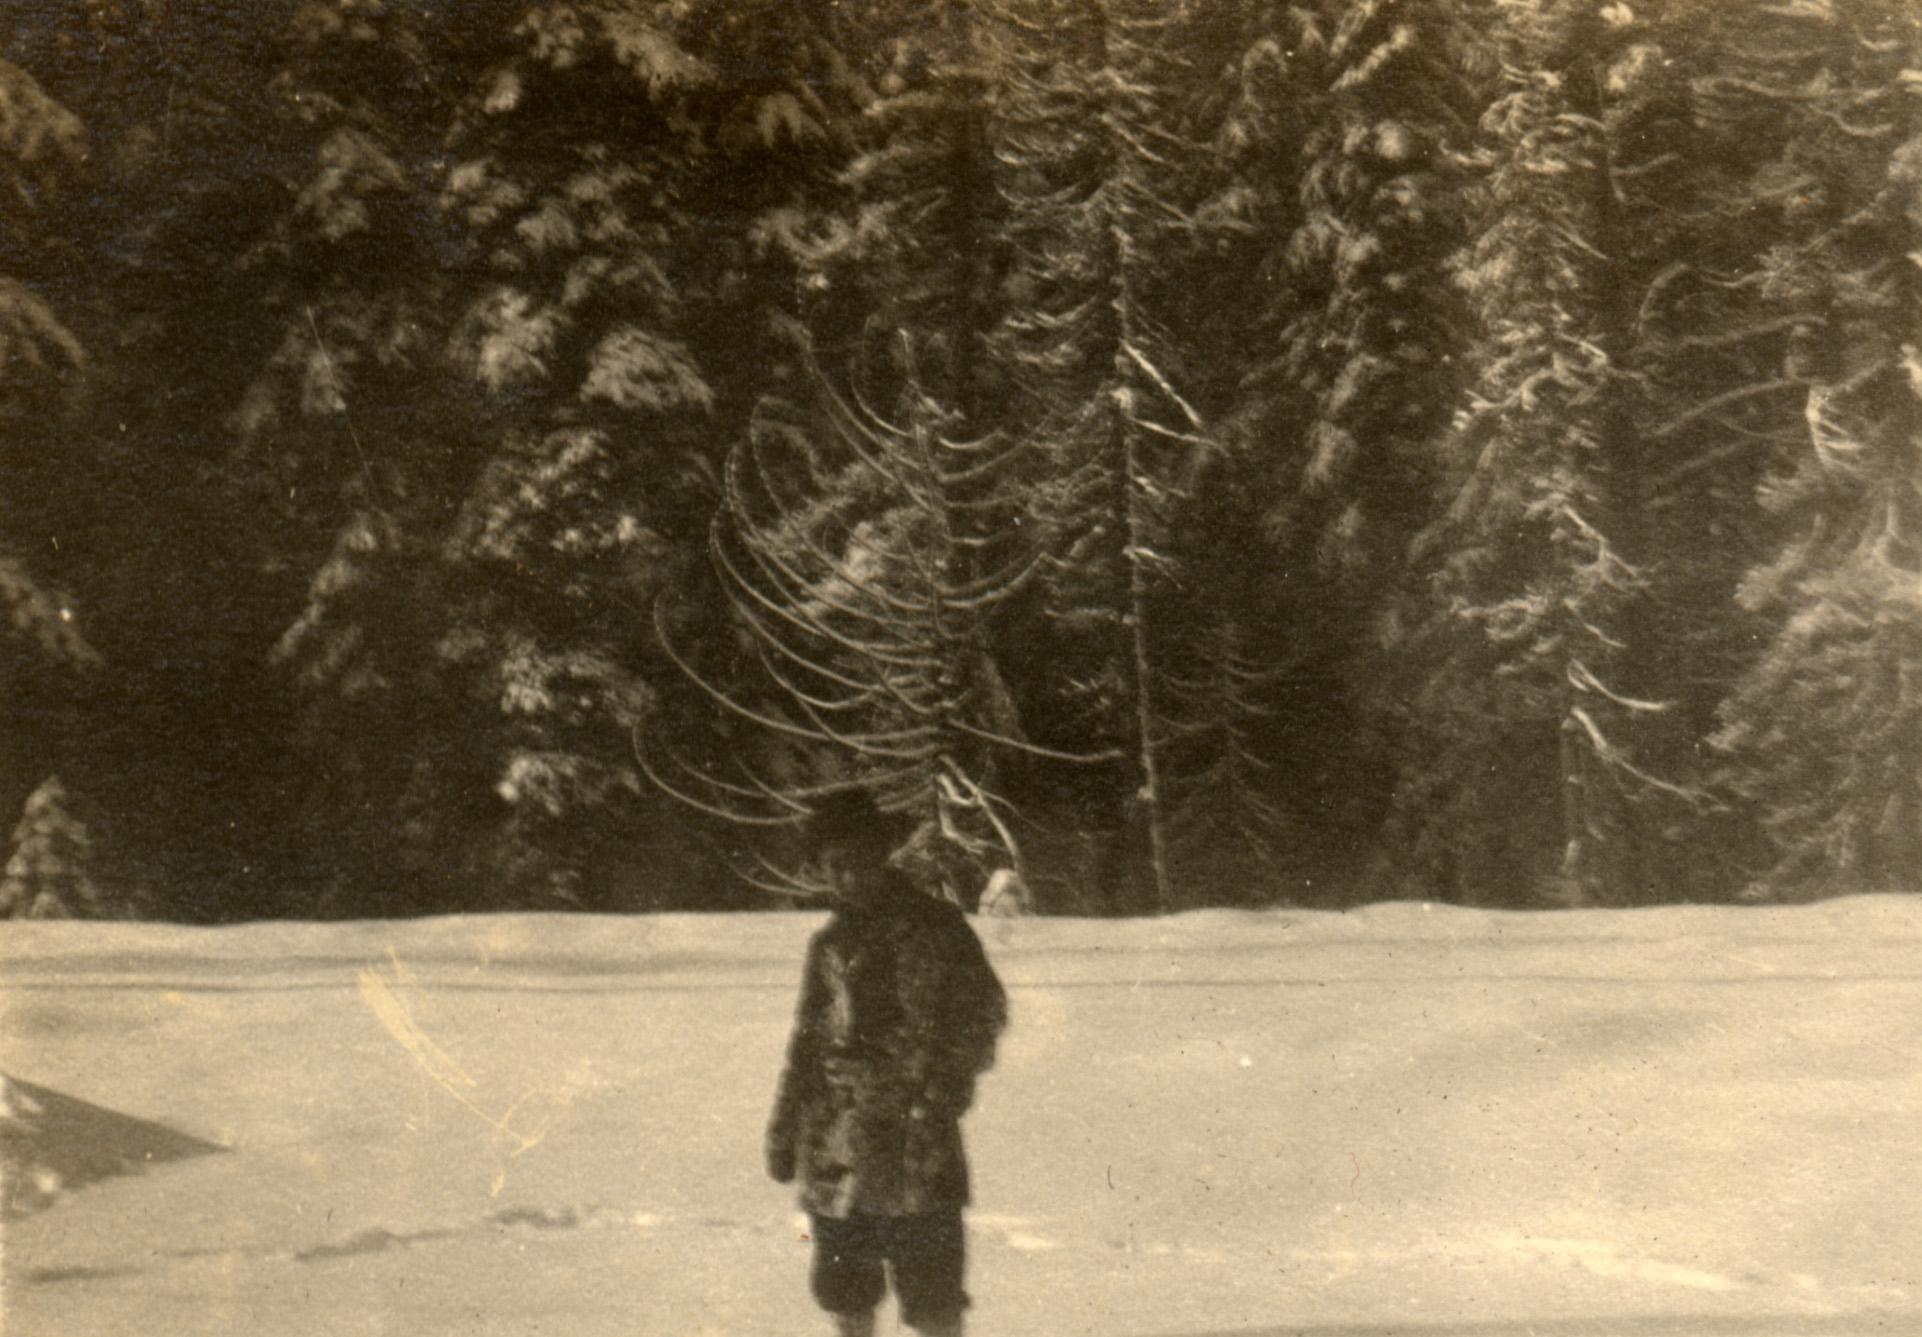 George nakashima stands bundled up, but white with snow, perhaps from playing in the snow. He's surrounded by level snow and in the near distance a wall of trees backdrops the scene.